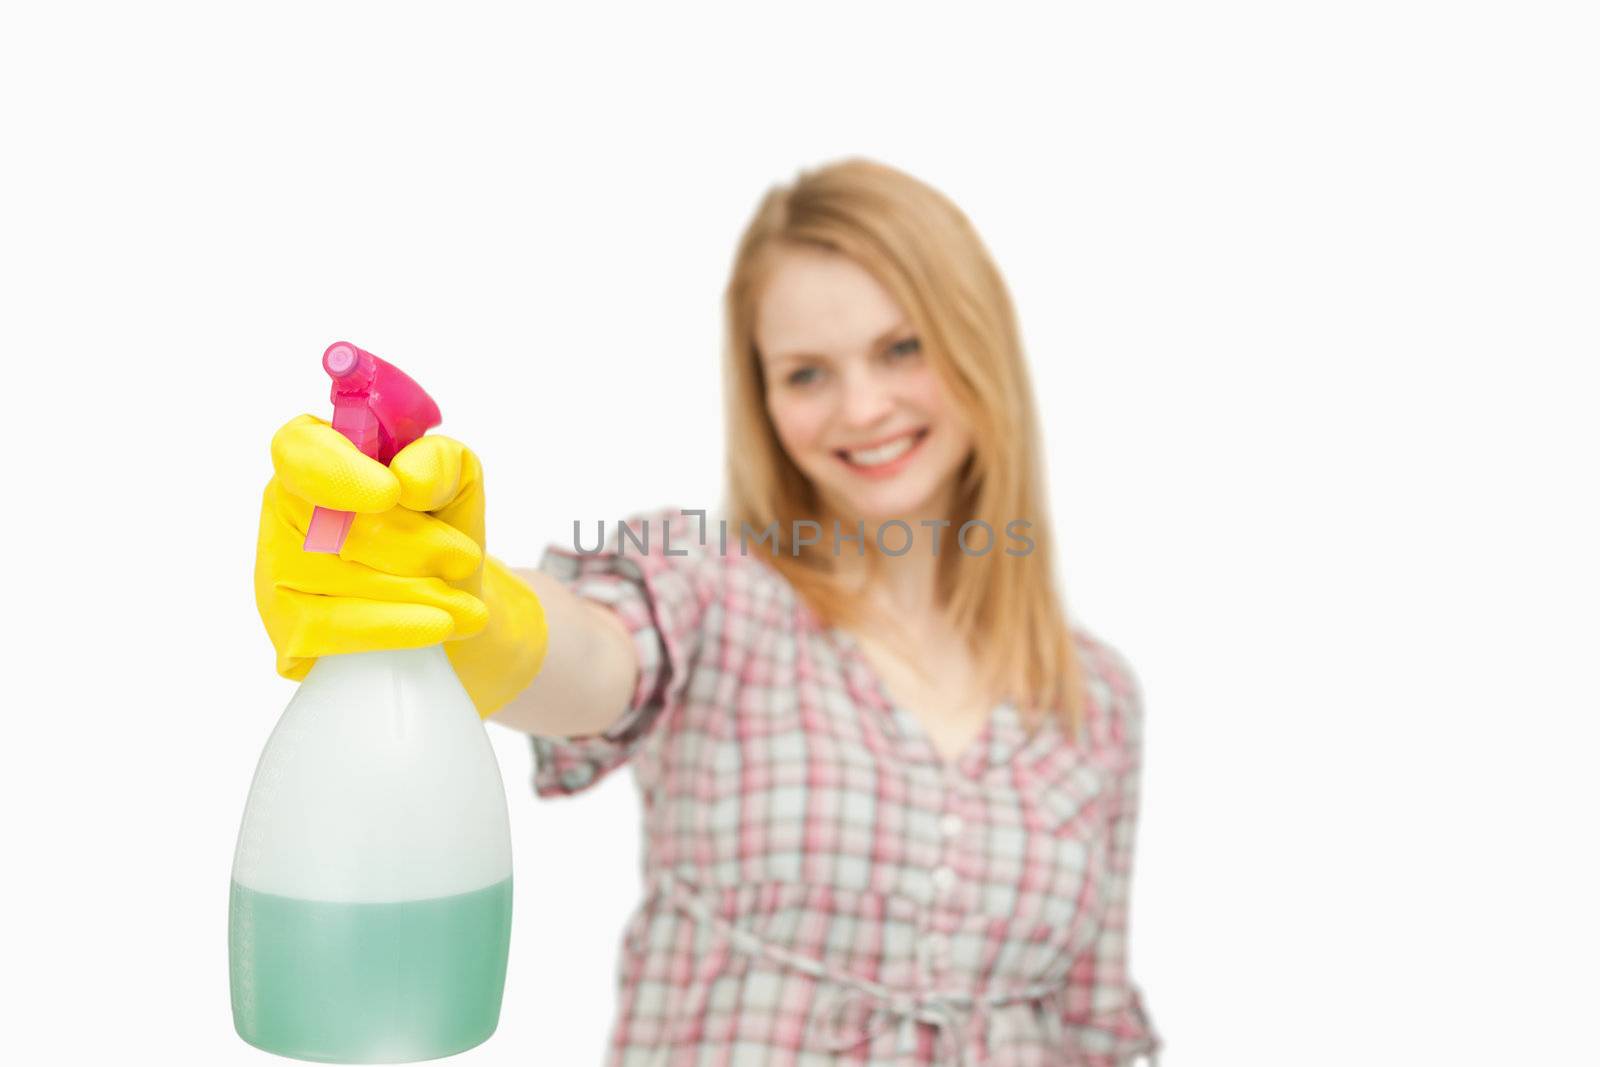 Woman holding a spray bottle against white background